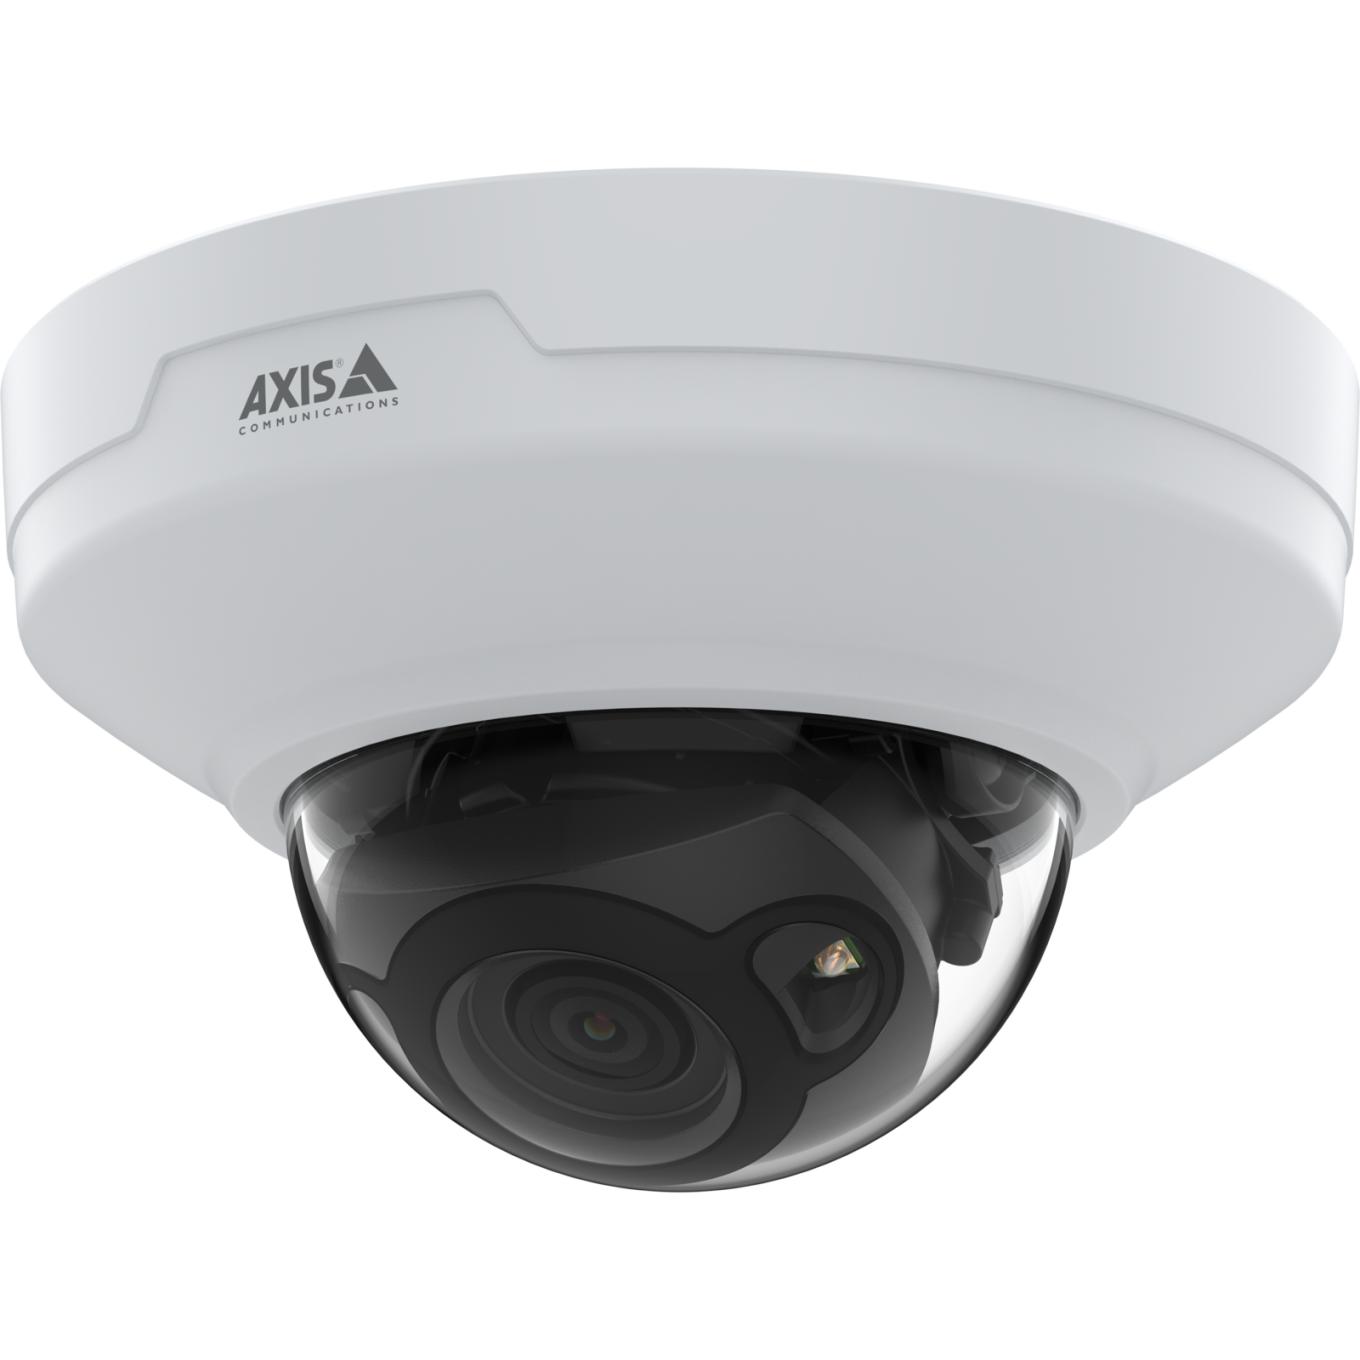 AXIS M4218-LV Dome Camera、左から見た図